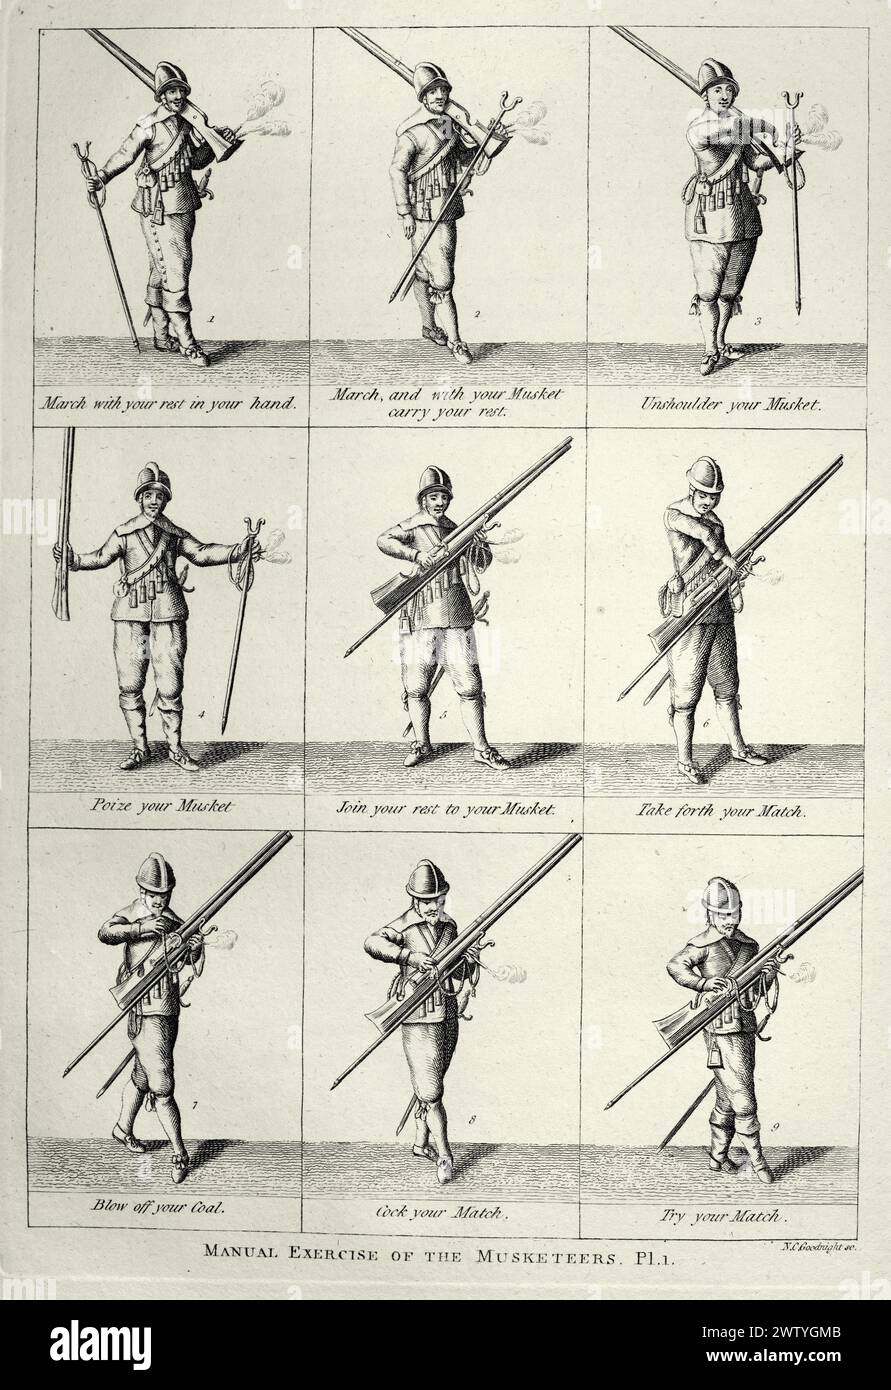 Vintage illustration, English soldier, Musketeer, Exercise with the Musket, Infantry, Military History, Weapons 17th Century Stock Photo